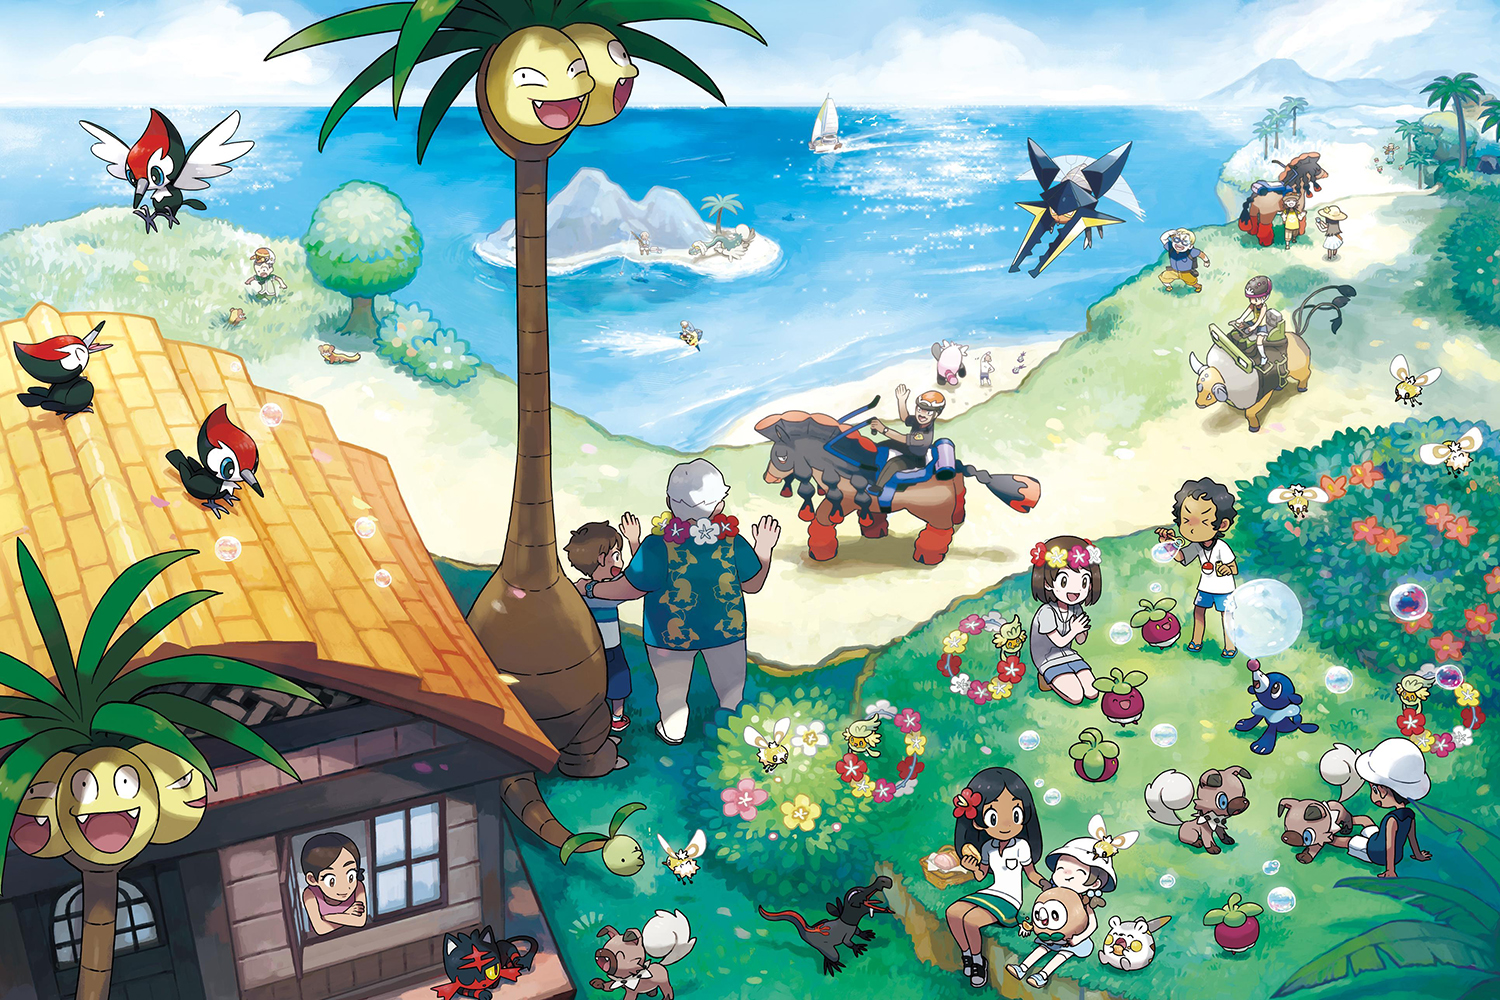 Check Out Top 16 Competitors For The Pokemon Sun & Moon Anime's